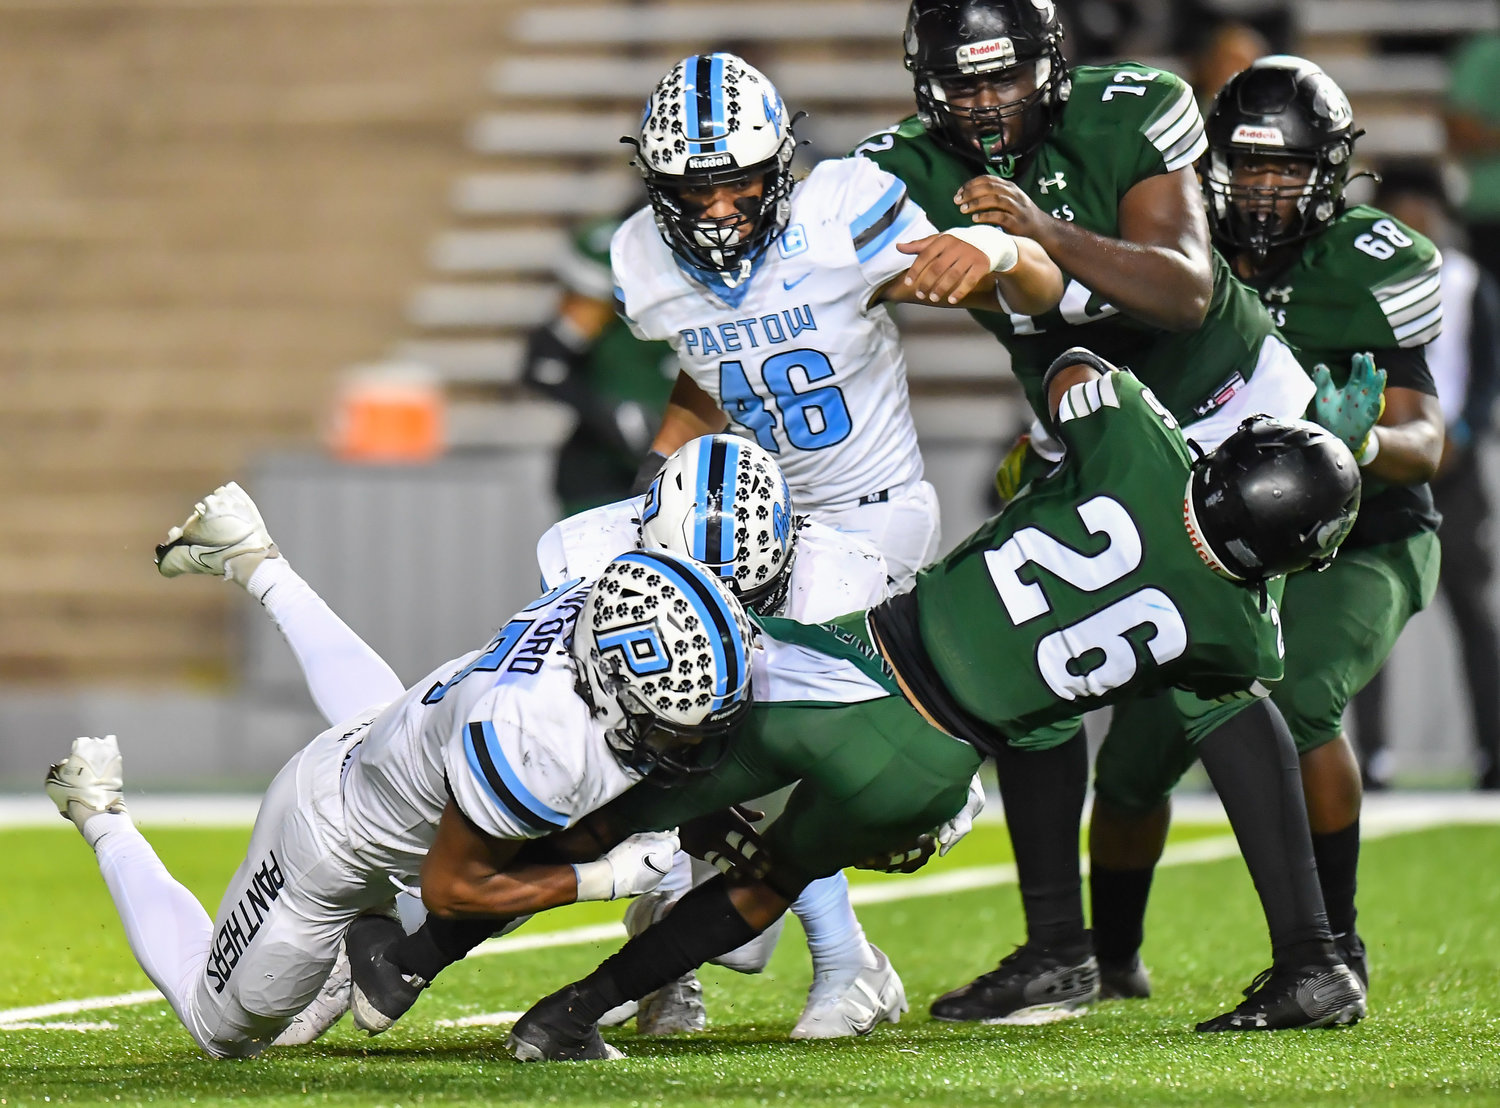 Houston, Tx. Dec 3, 2021: Paetows defense hold Hightower scoreless during the first half of the quarterfinal playoff game between Paetow and F,B. Hightower at Rice Stadium in Houston. (Photo by Mark Gooman / Katy Times)